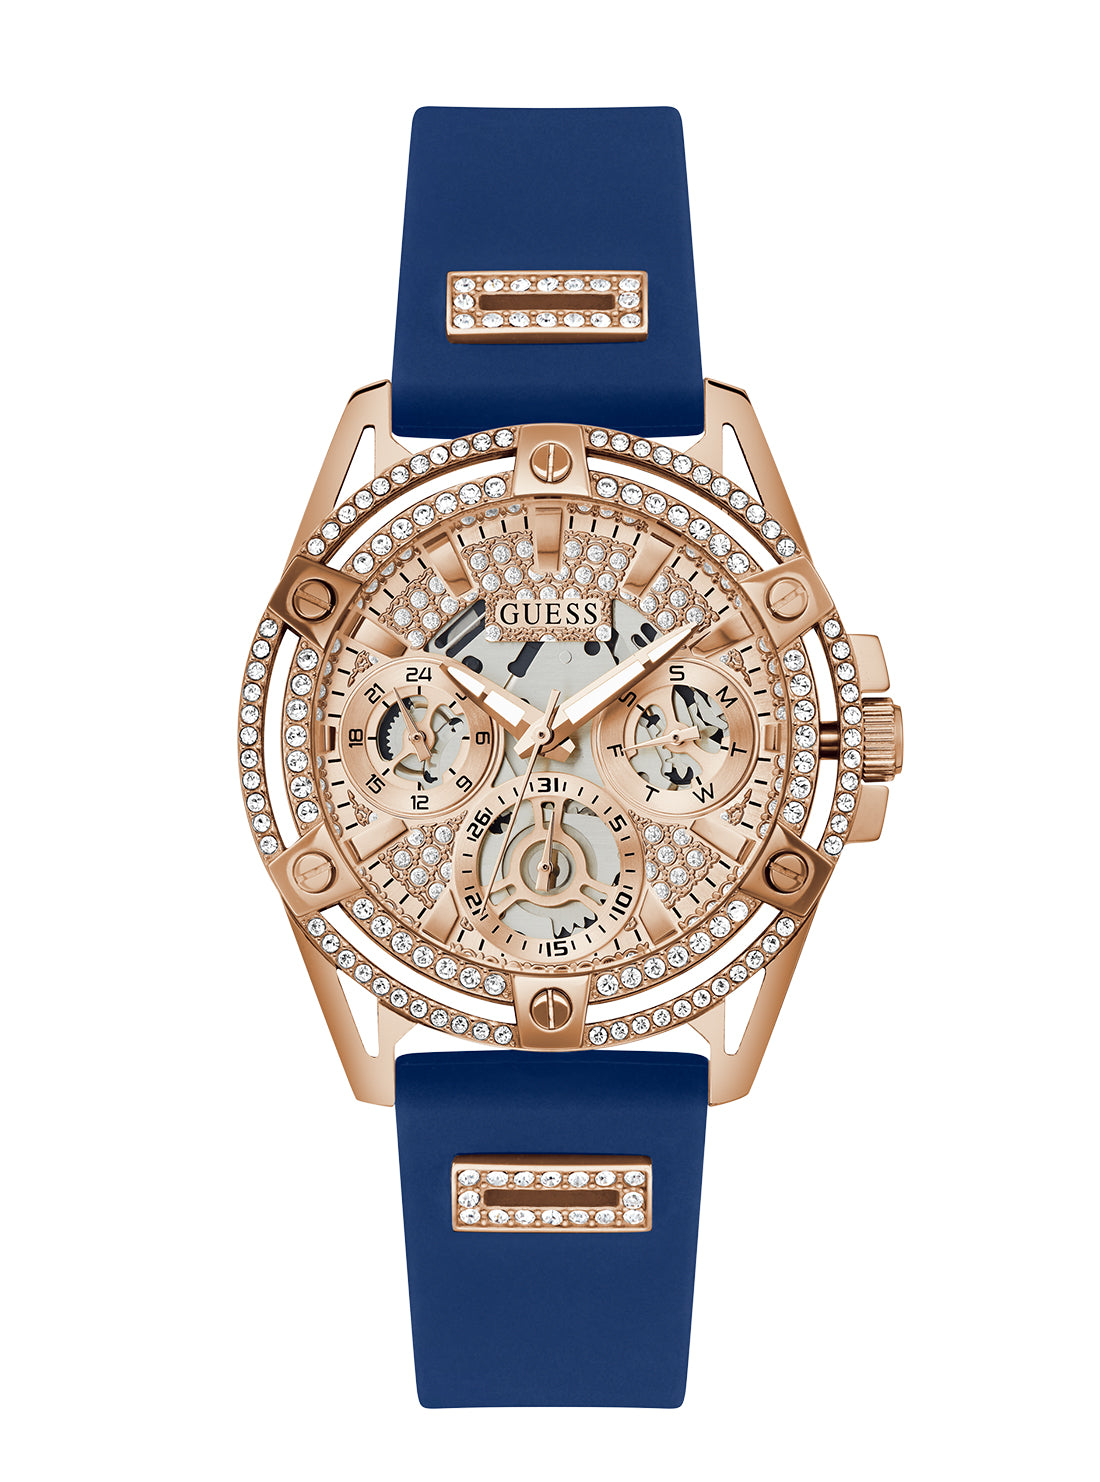 GUESS Women's Rose Gold Blue Queen Silicone Watch GW0536L5 Front View